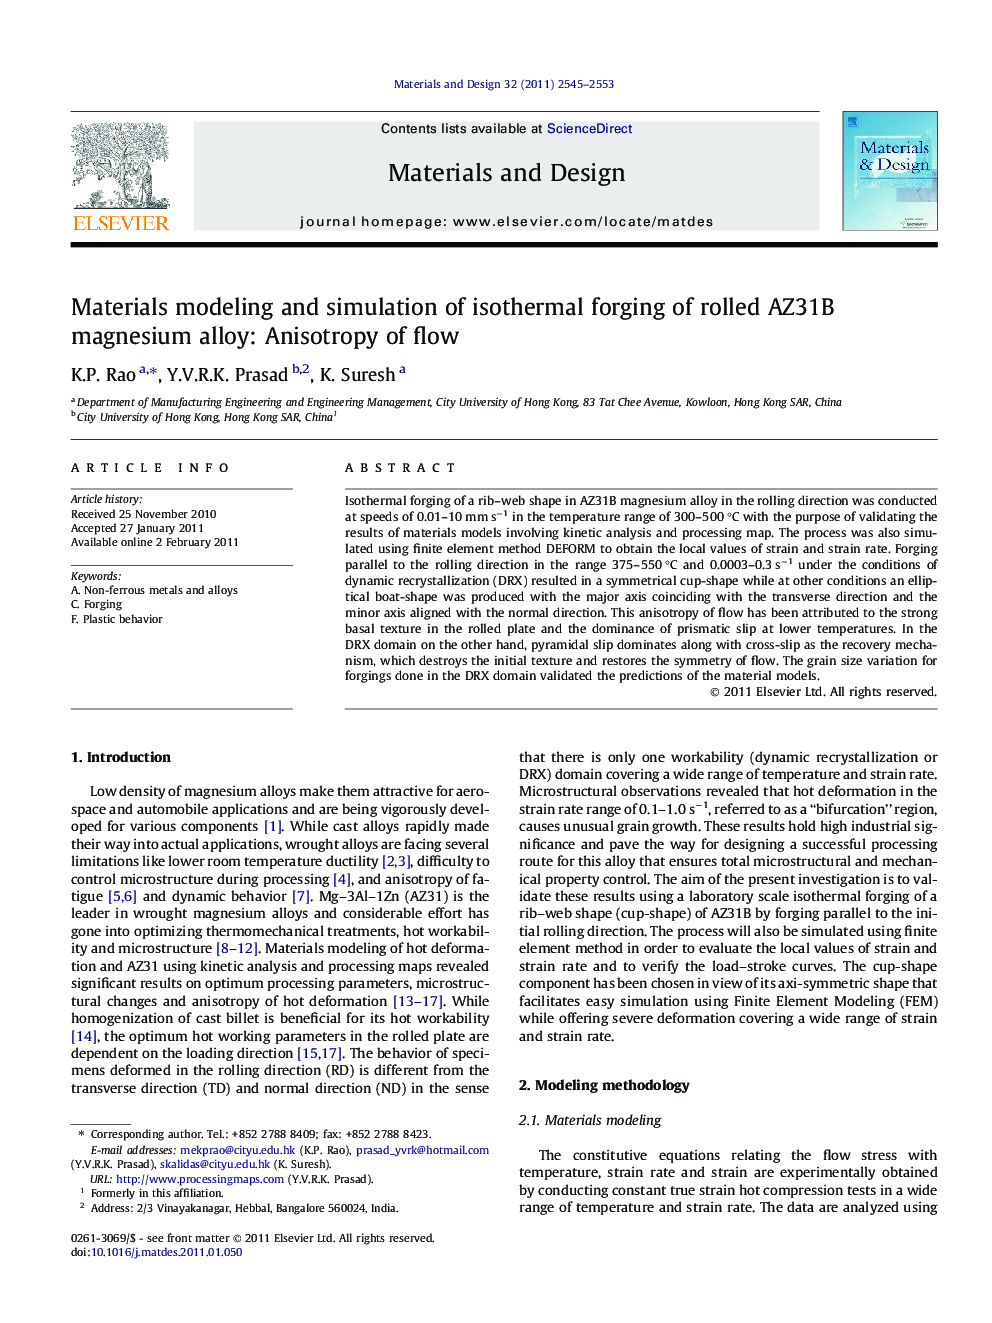 Materials modeling and simulation of isothermal forging of rolled AZ31B magnesium alloy: Anisotropy of flow